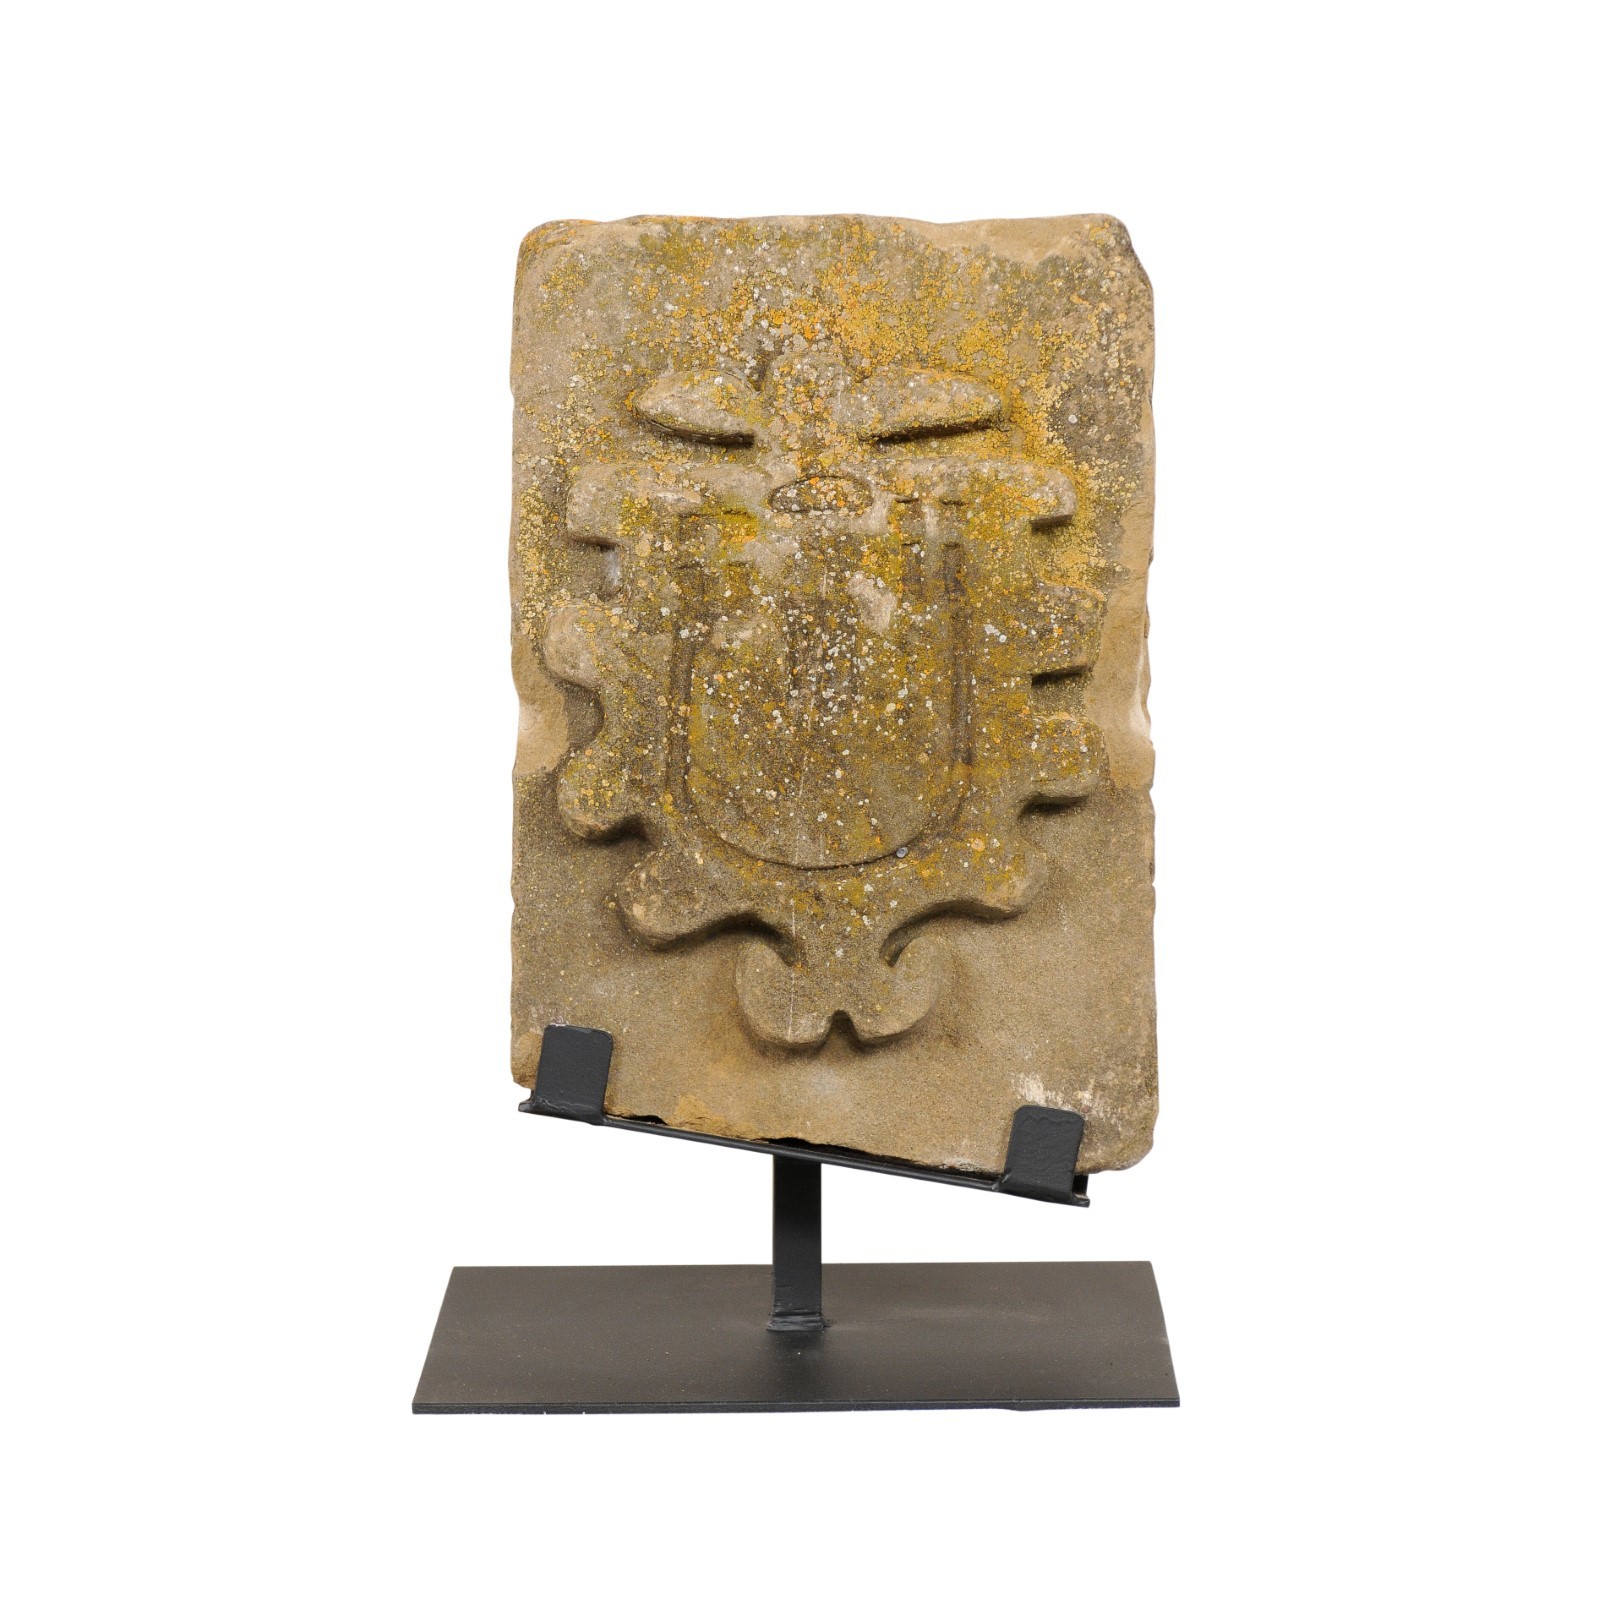 A Spanish Aragon 18th -19th C. Carved Stone